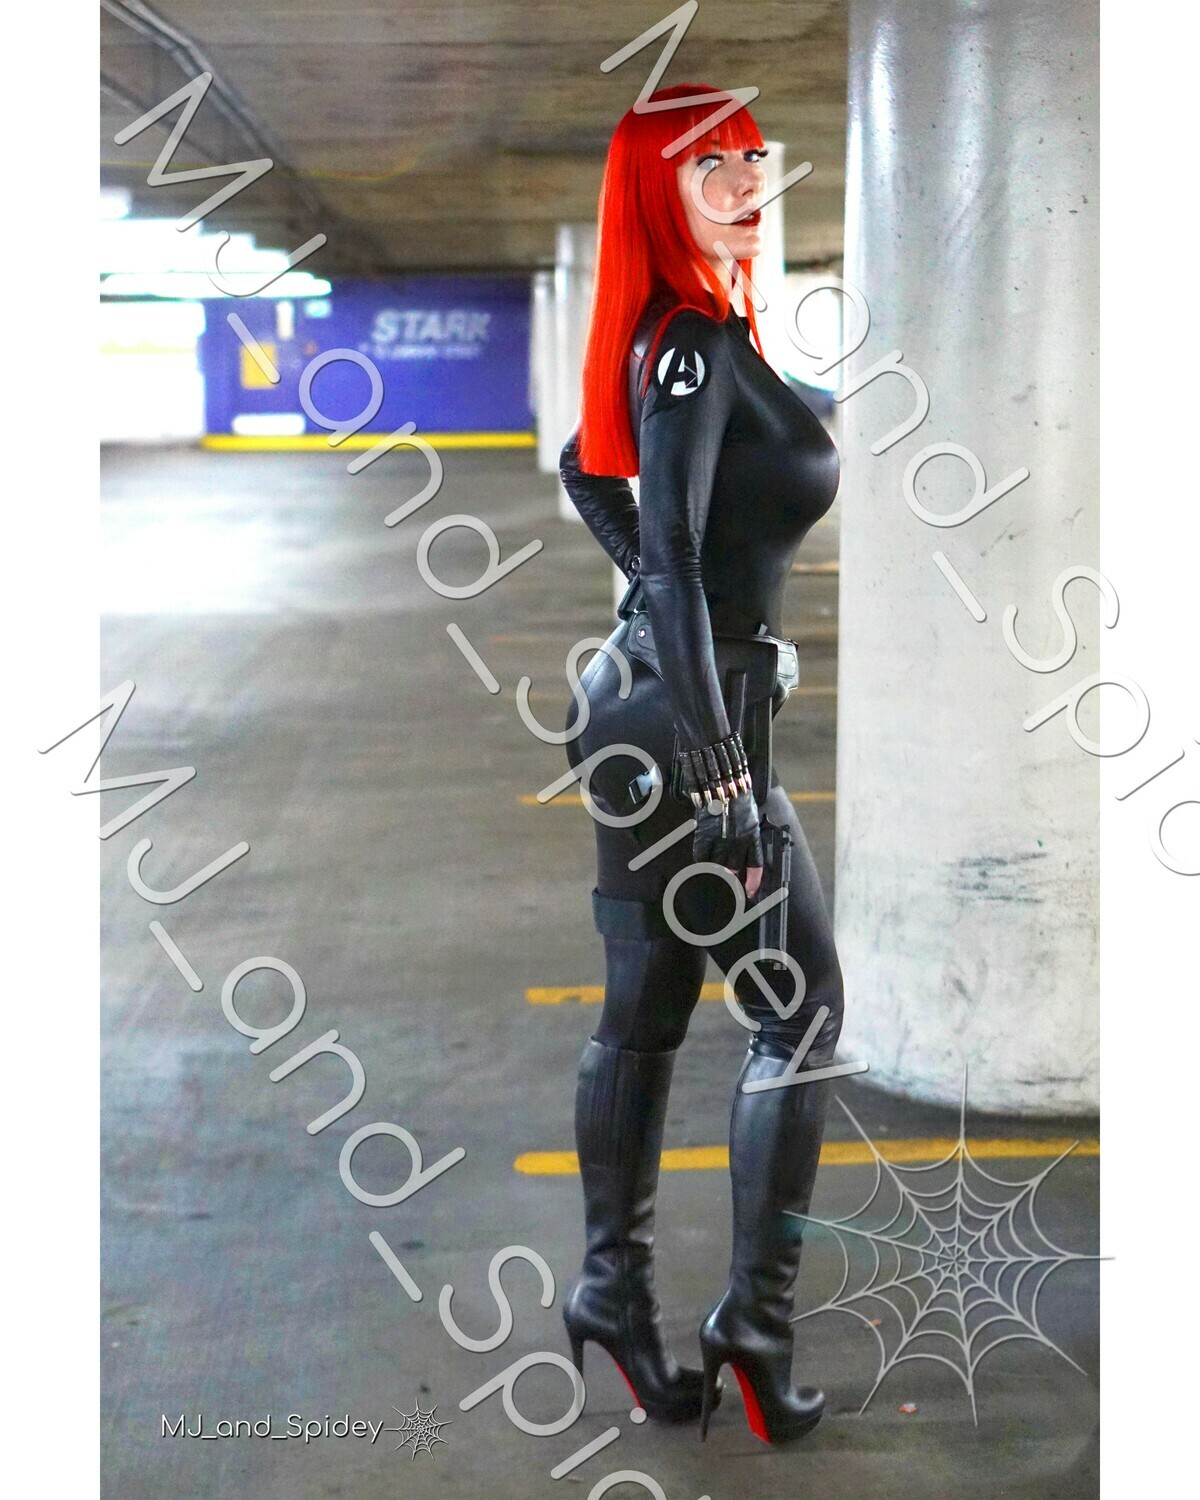 Marvel - Avengers - Black Widow 4 -  Cosplay Print (@MJ_and_Spidey, MJ and Spidey, Comics)